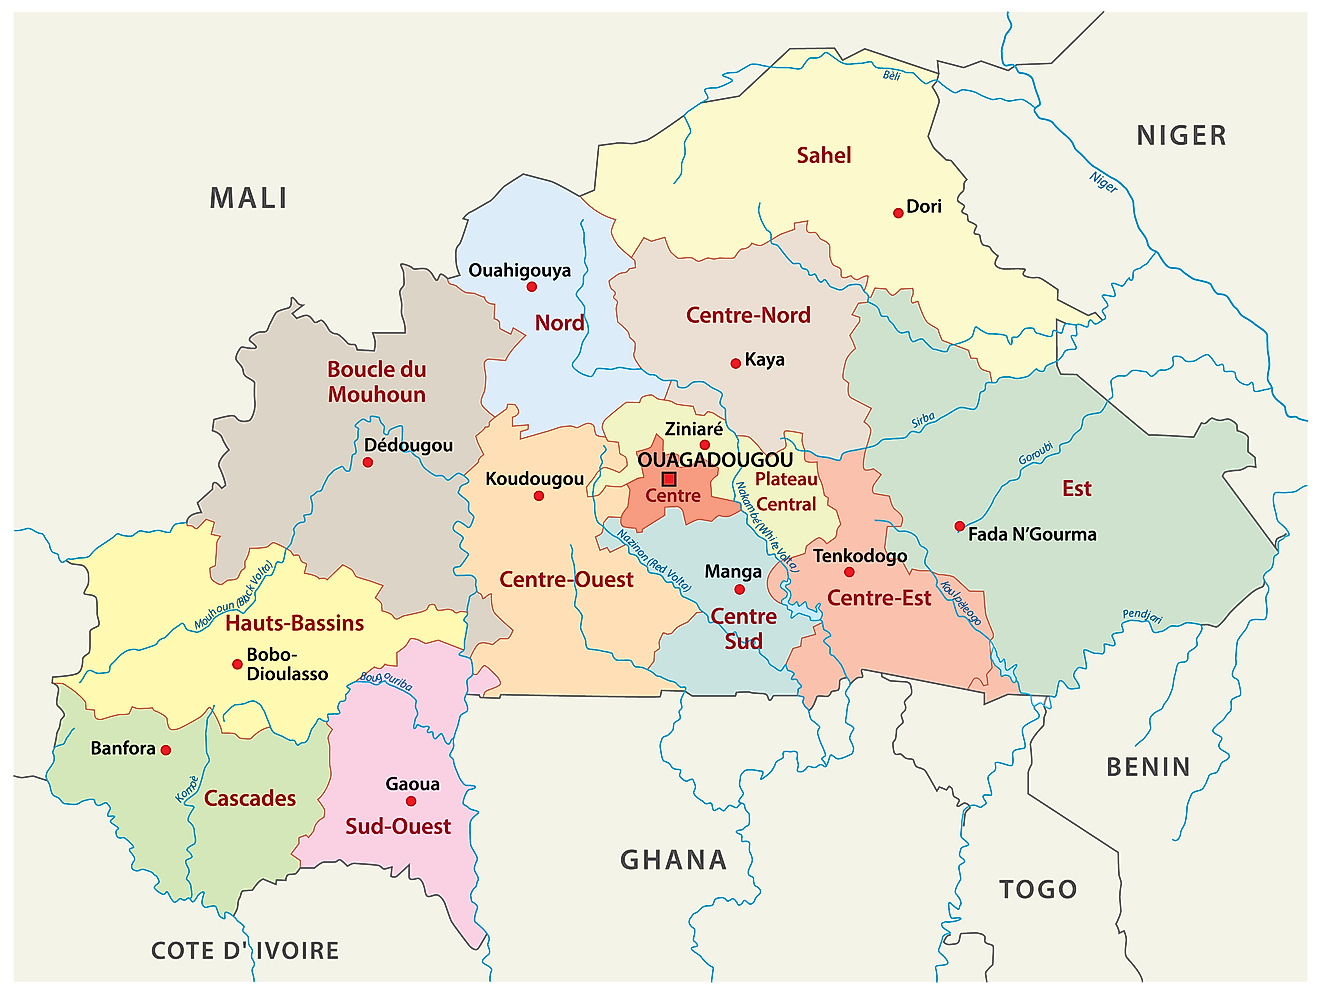 Political map of Burkina Faso displaying its 13 regions, their capitals, and the national capital of Ouagadougou.